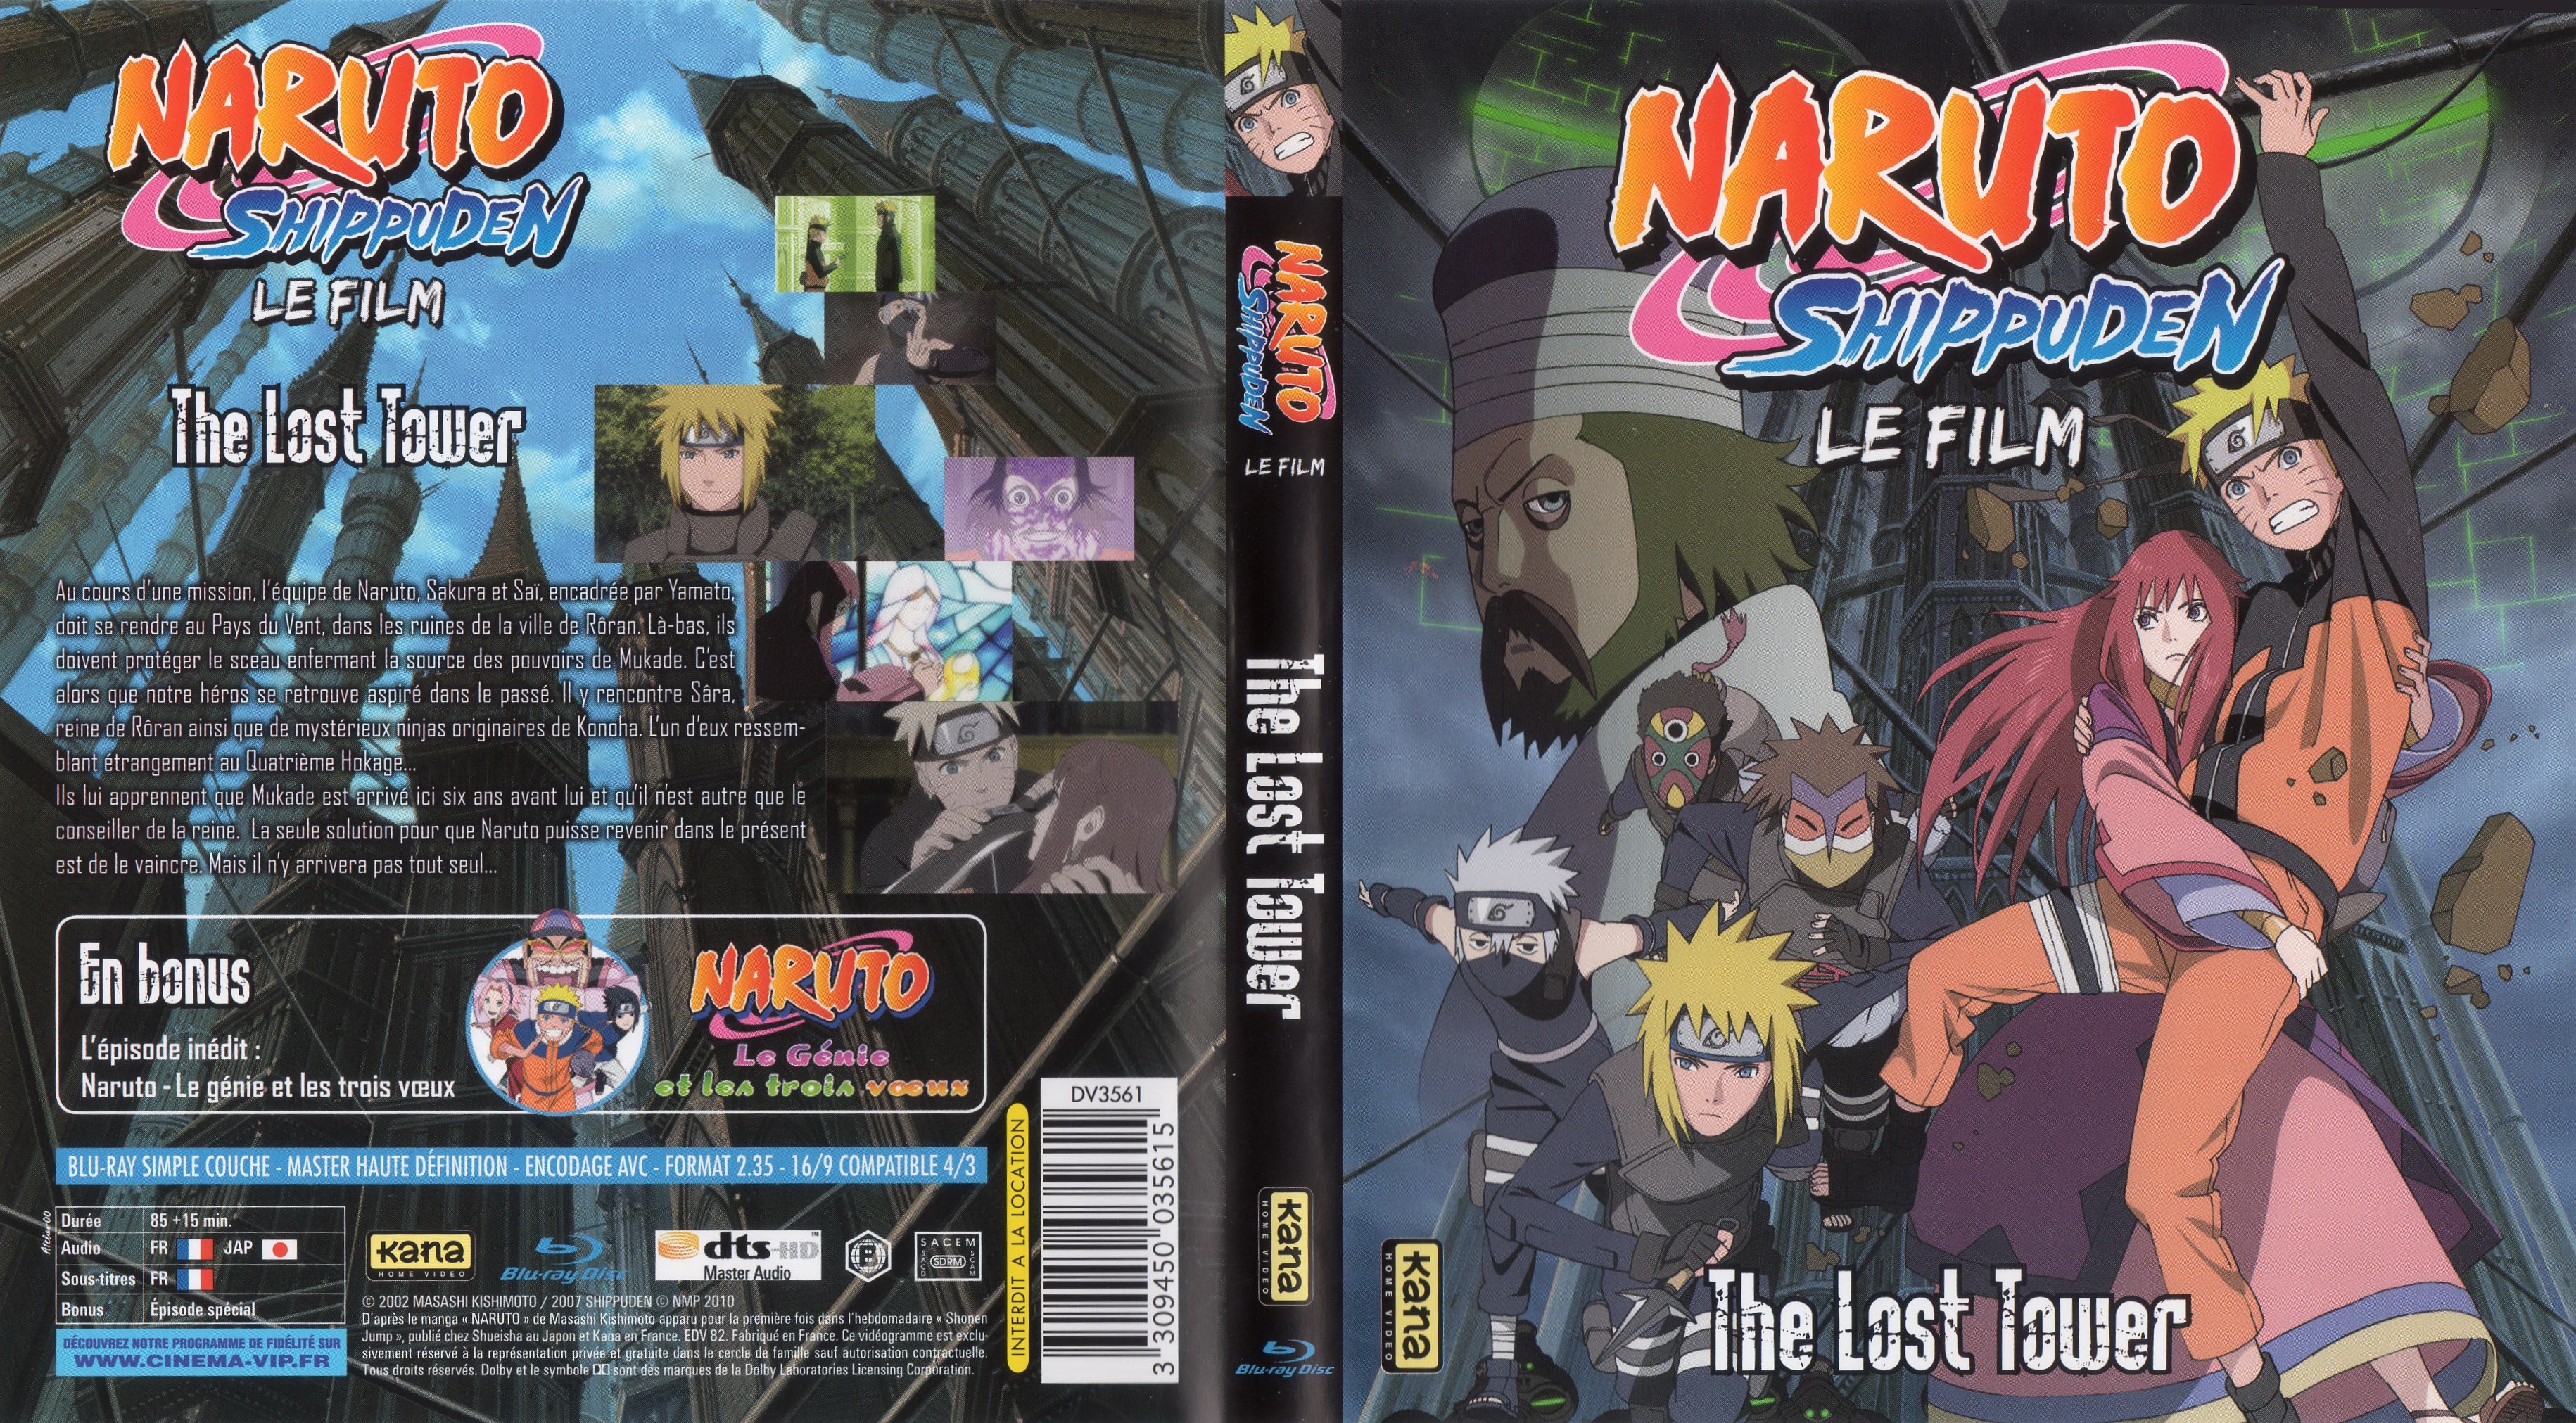 Jaquette DVD Naruto Shippuden - The lost Tower (BLU-RAY)